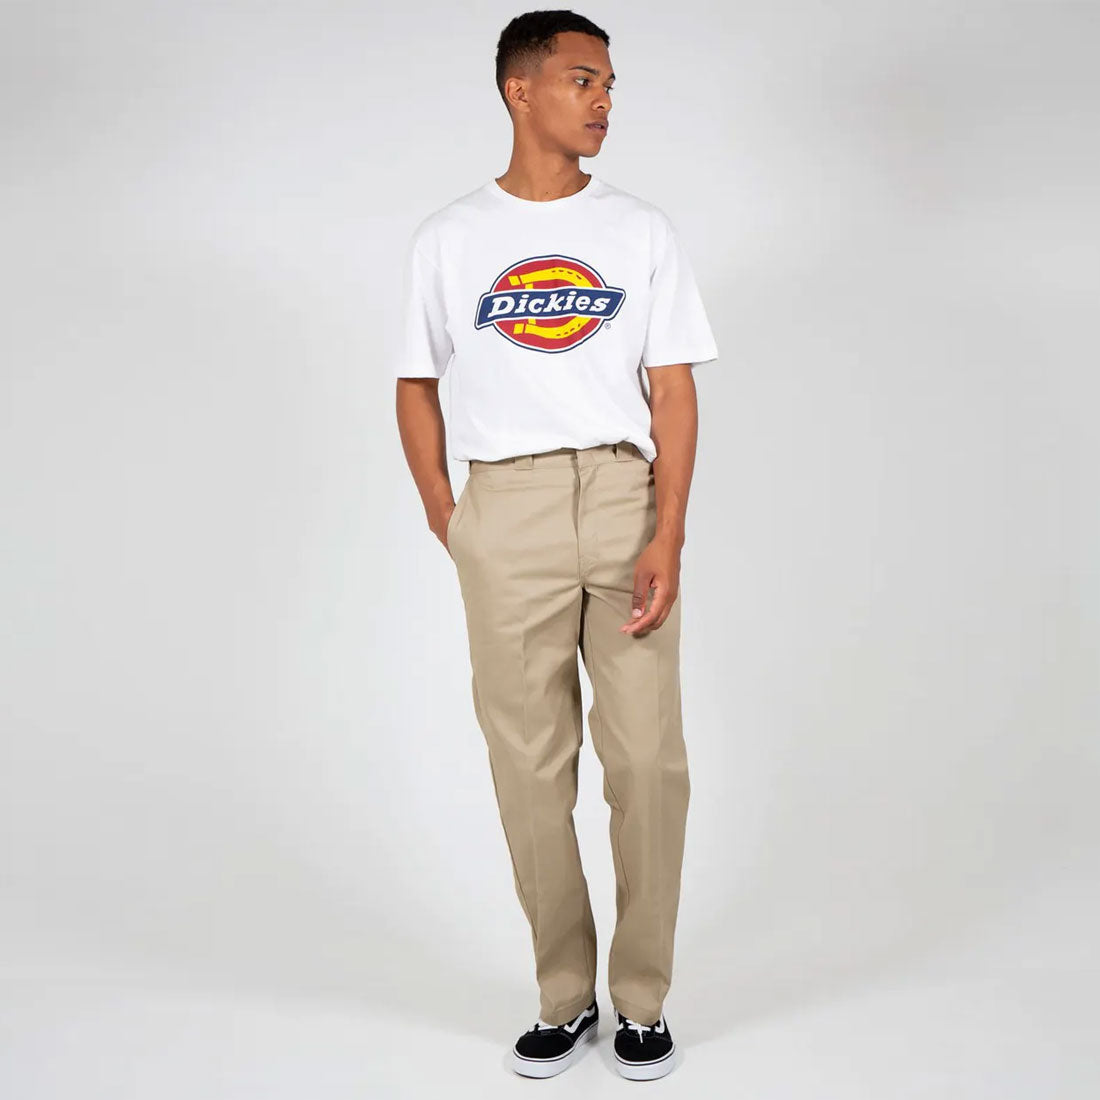 874 khaki dickies outfit inspo  Dickies outfit, Simple fits, Dickies